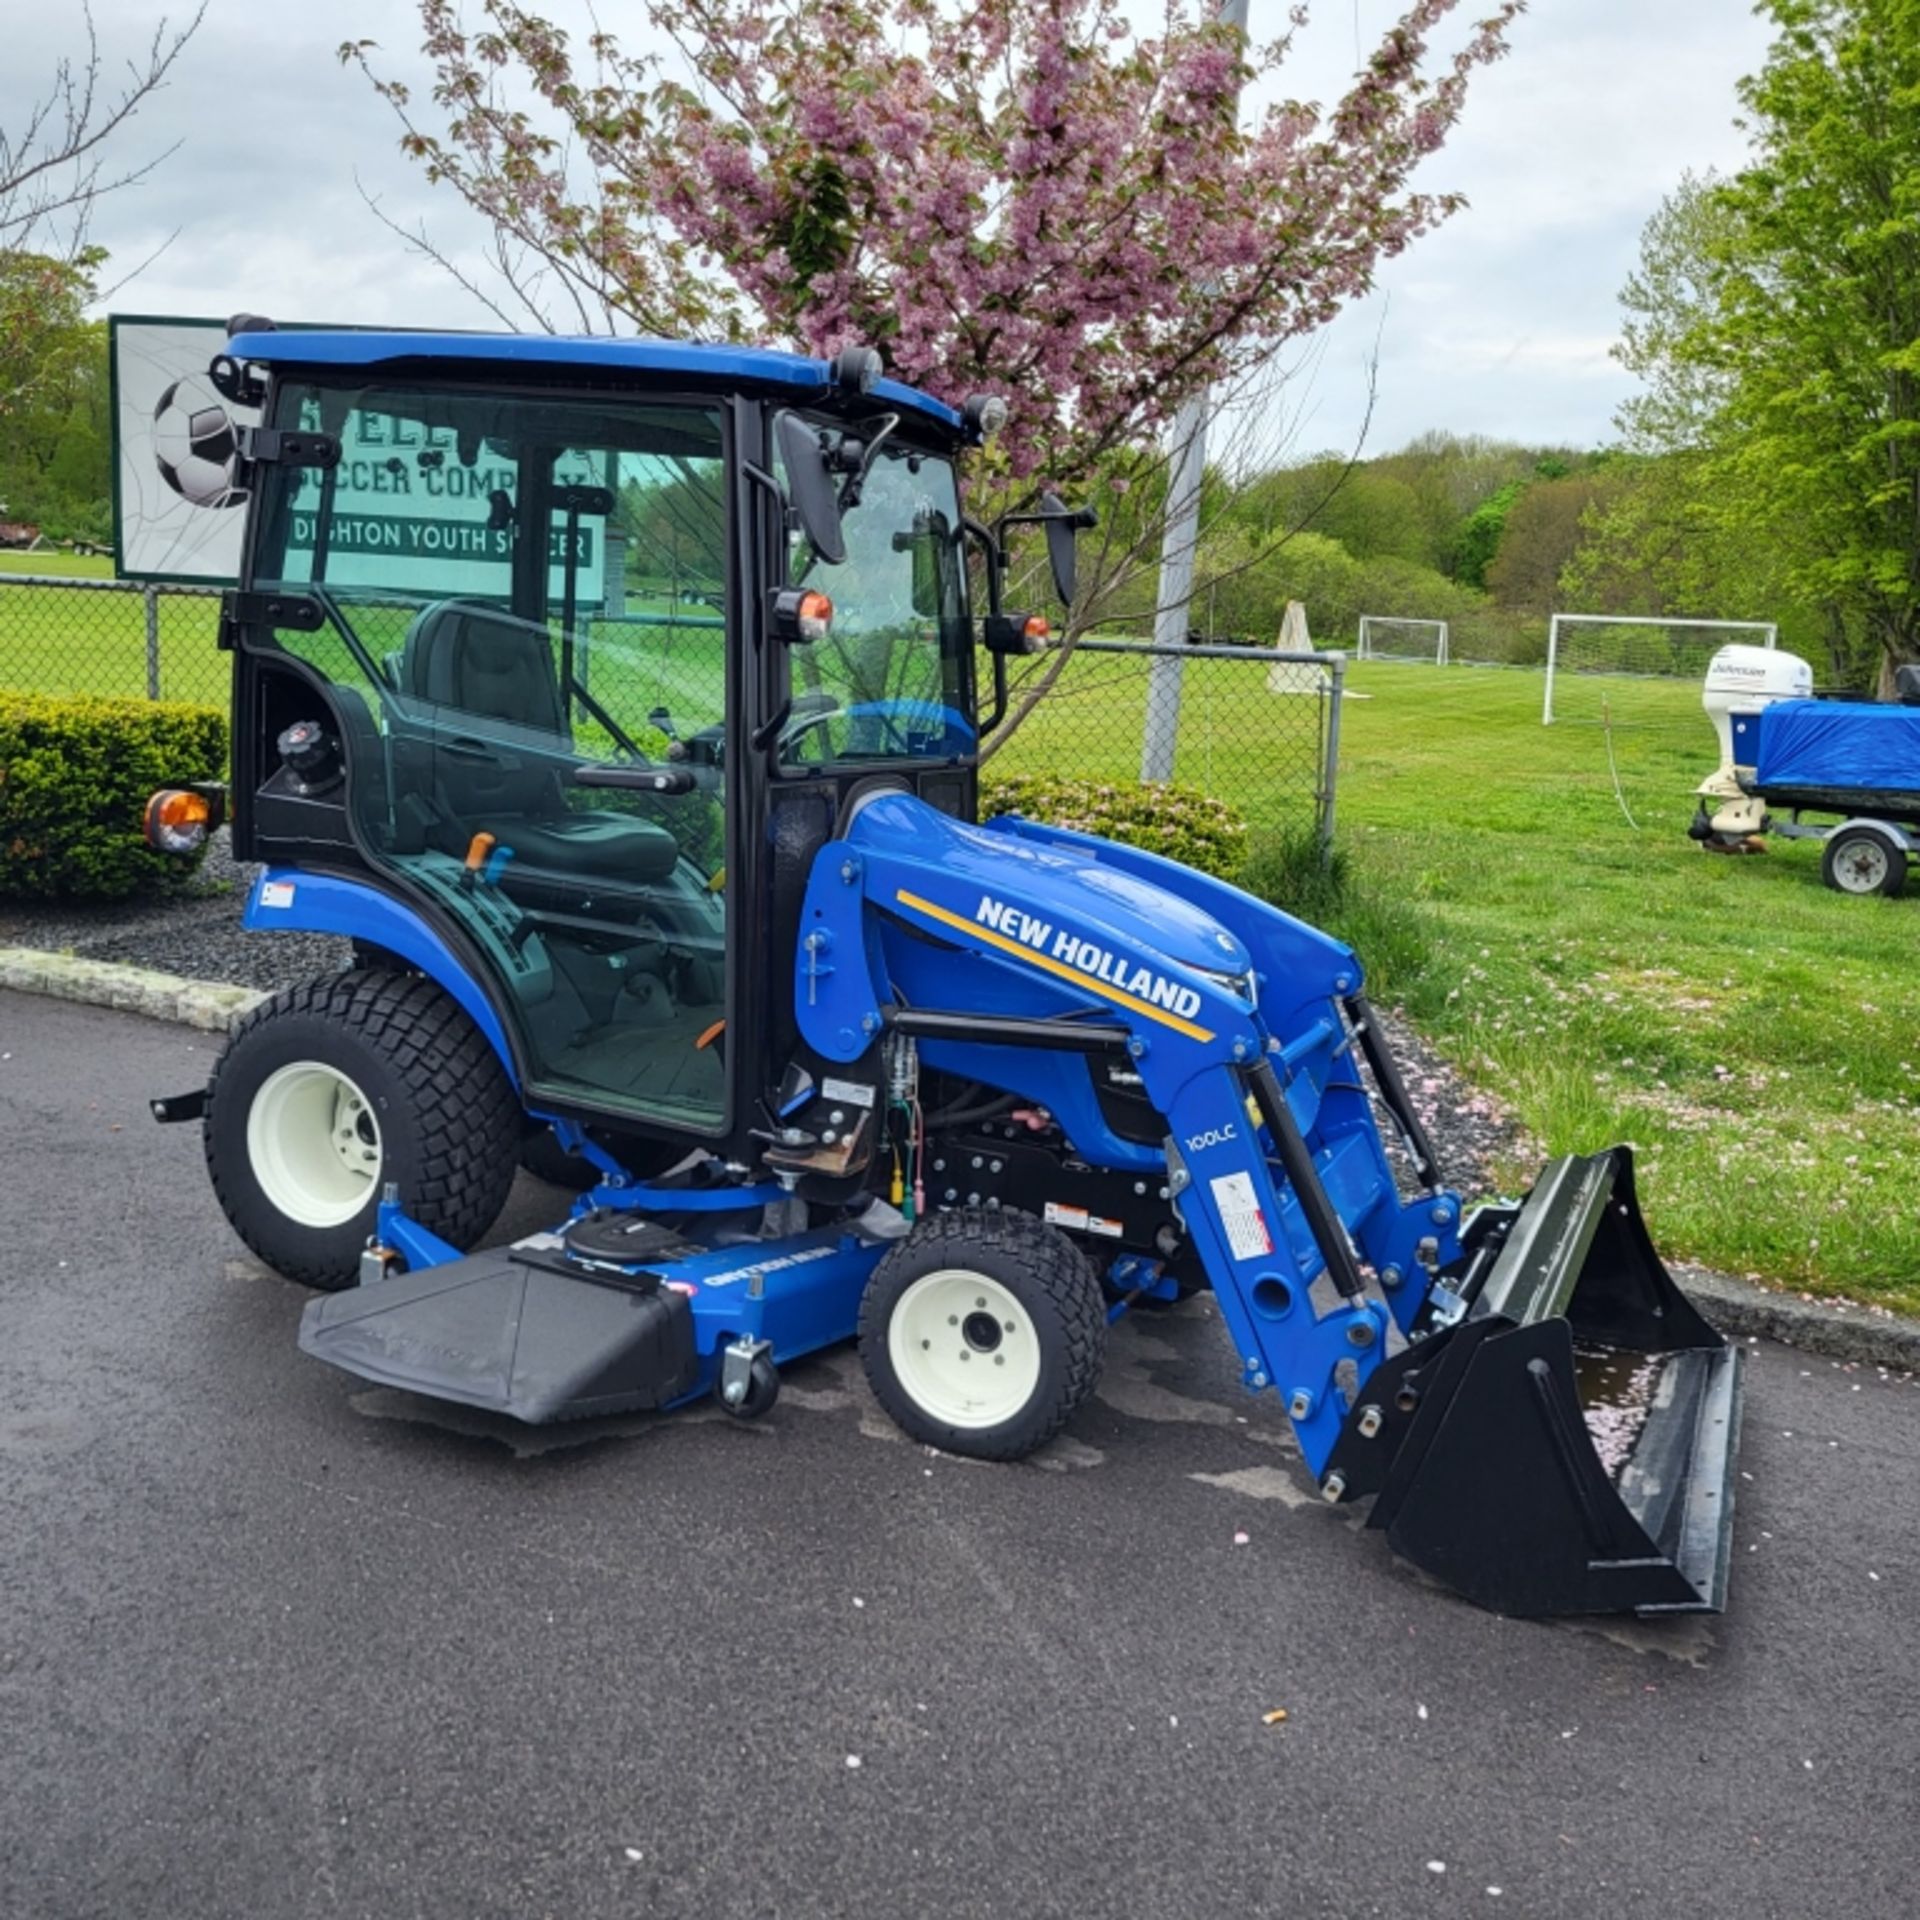 New Holland Workmaster 25s Tractor - Image 8 of 8